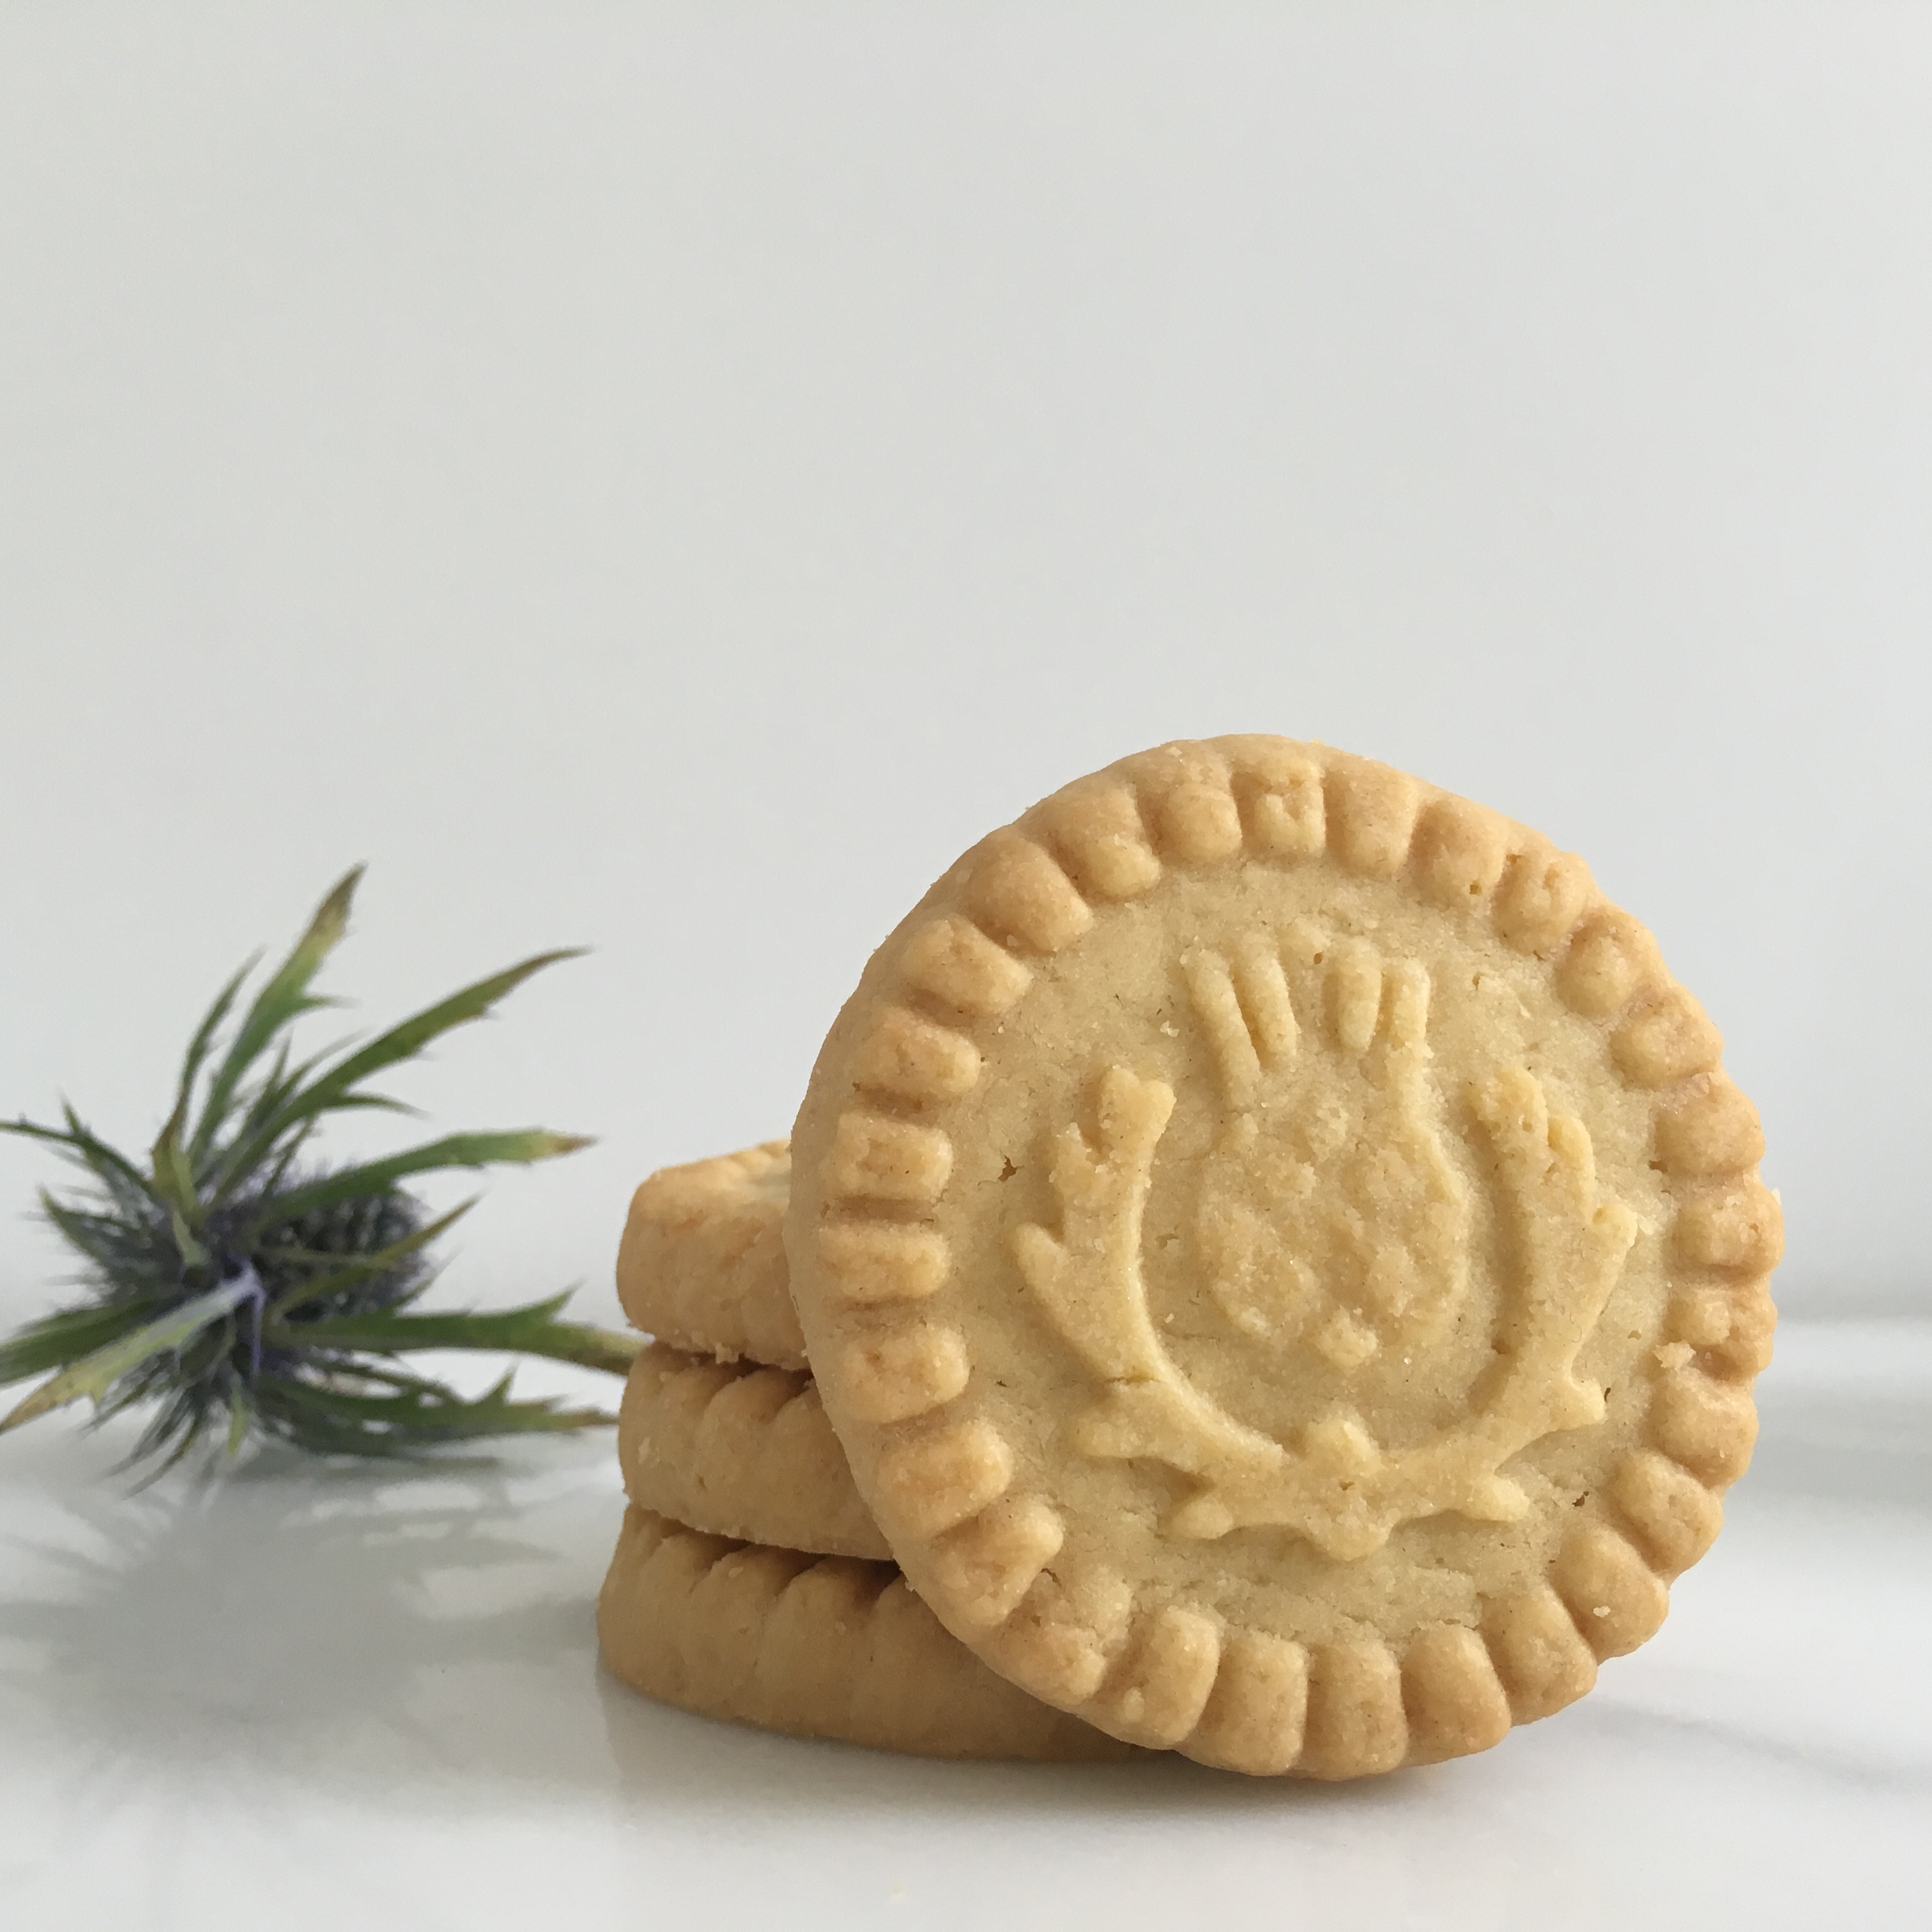 Walkers and Glenfiddich Whisky Shortbread rounds with a thistle